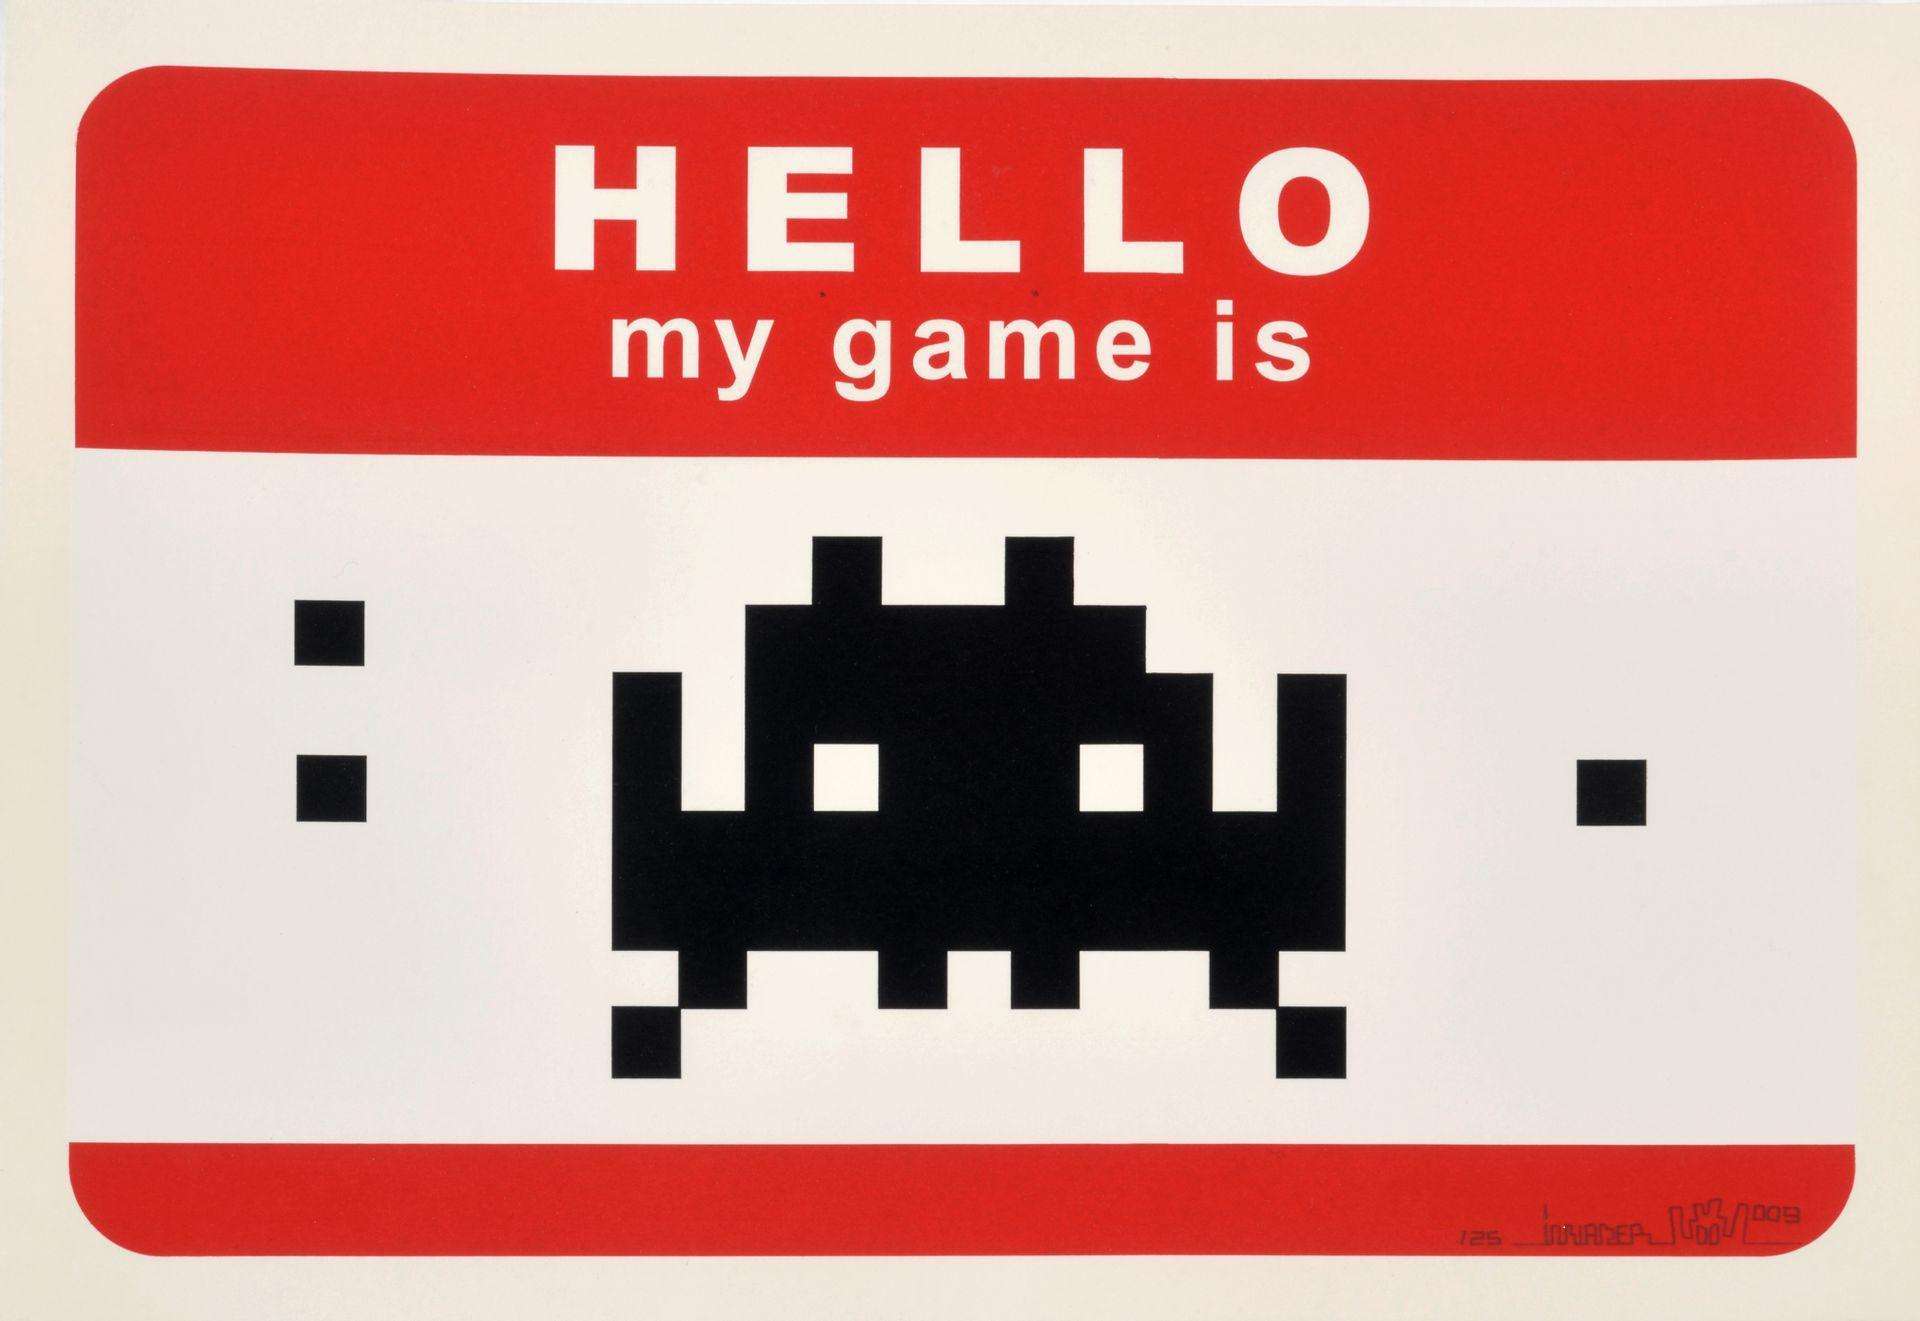 10 Facts About Invader's Hello My Game Is